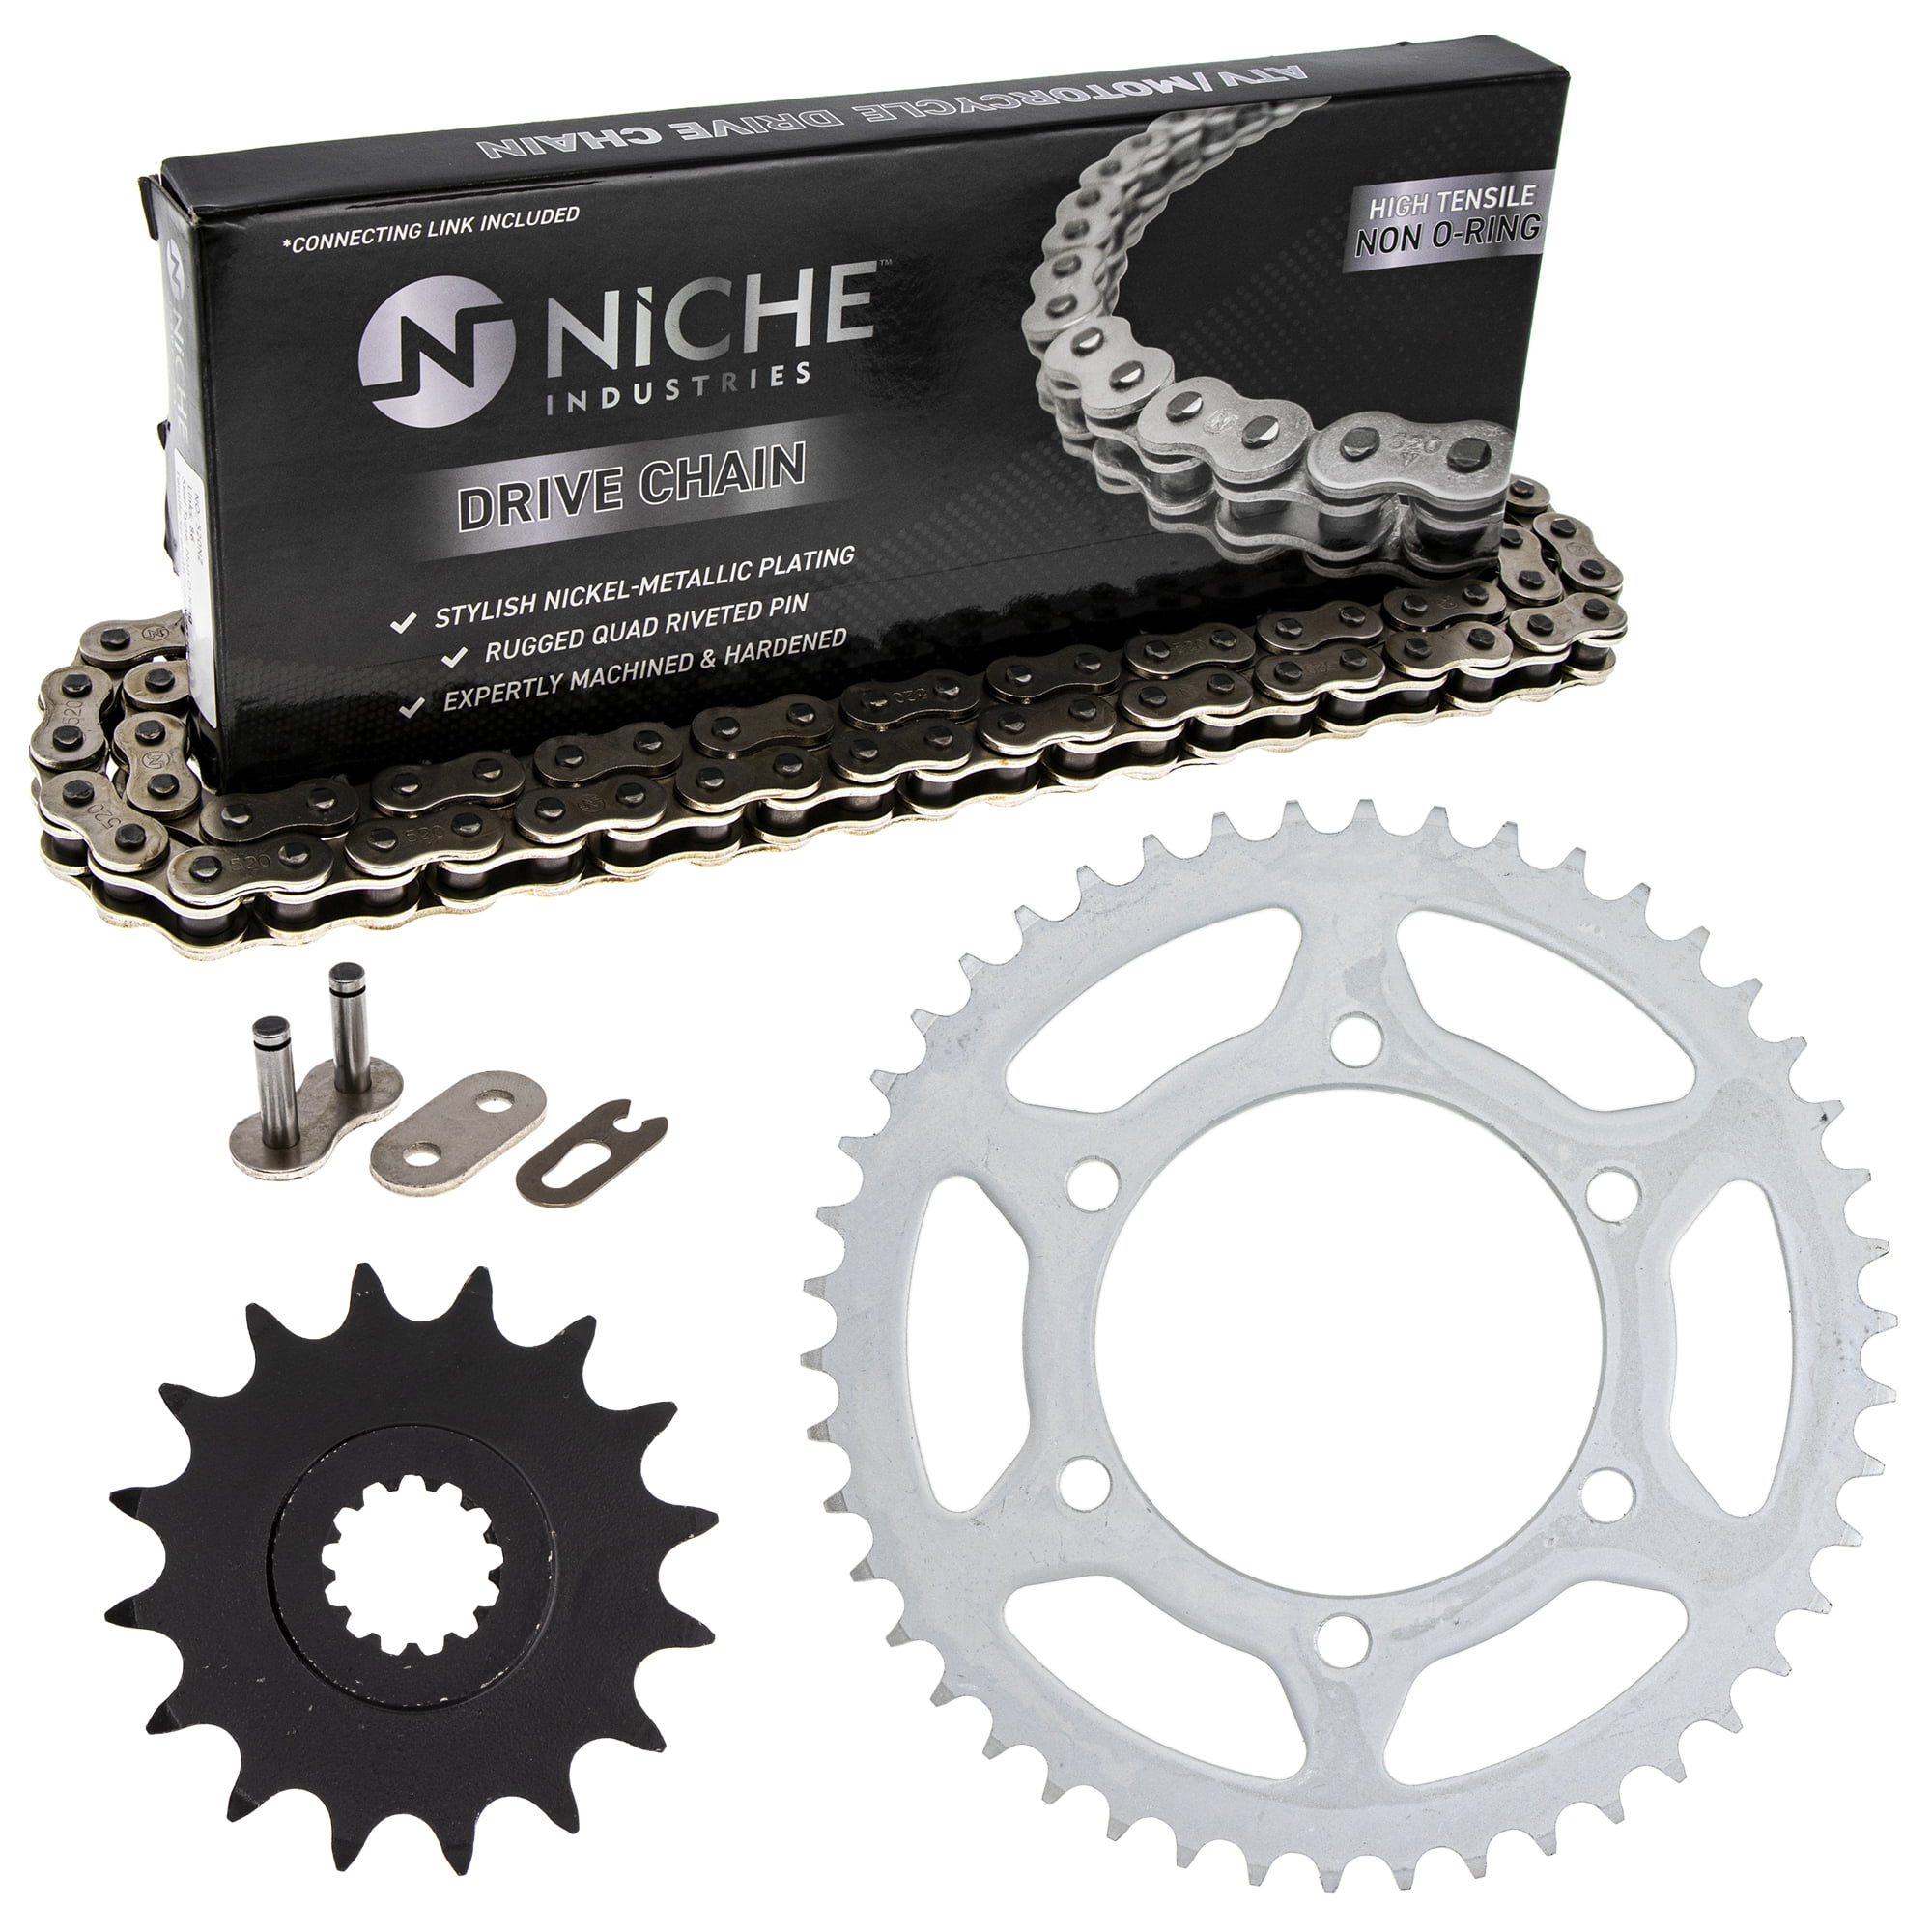 NICHE 520 Drive Chain 120 Links O-Ring With Connecting Master Link for Motorcycle ATV Dirt Bike 